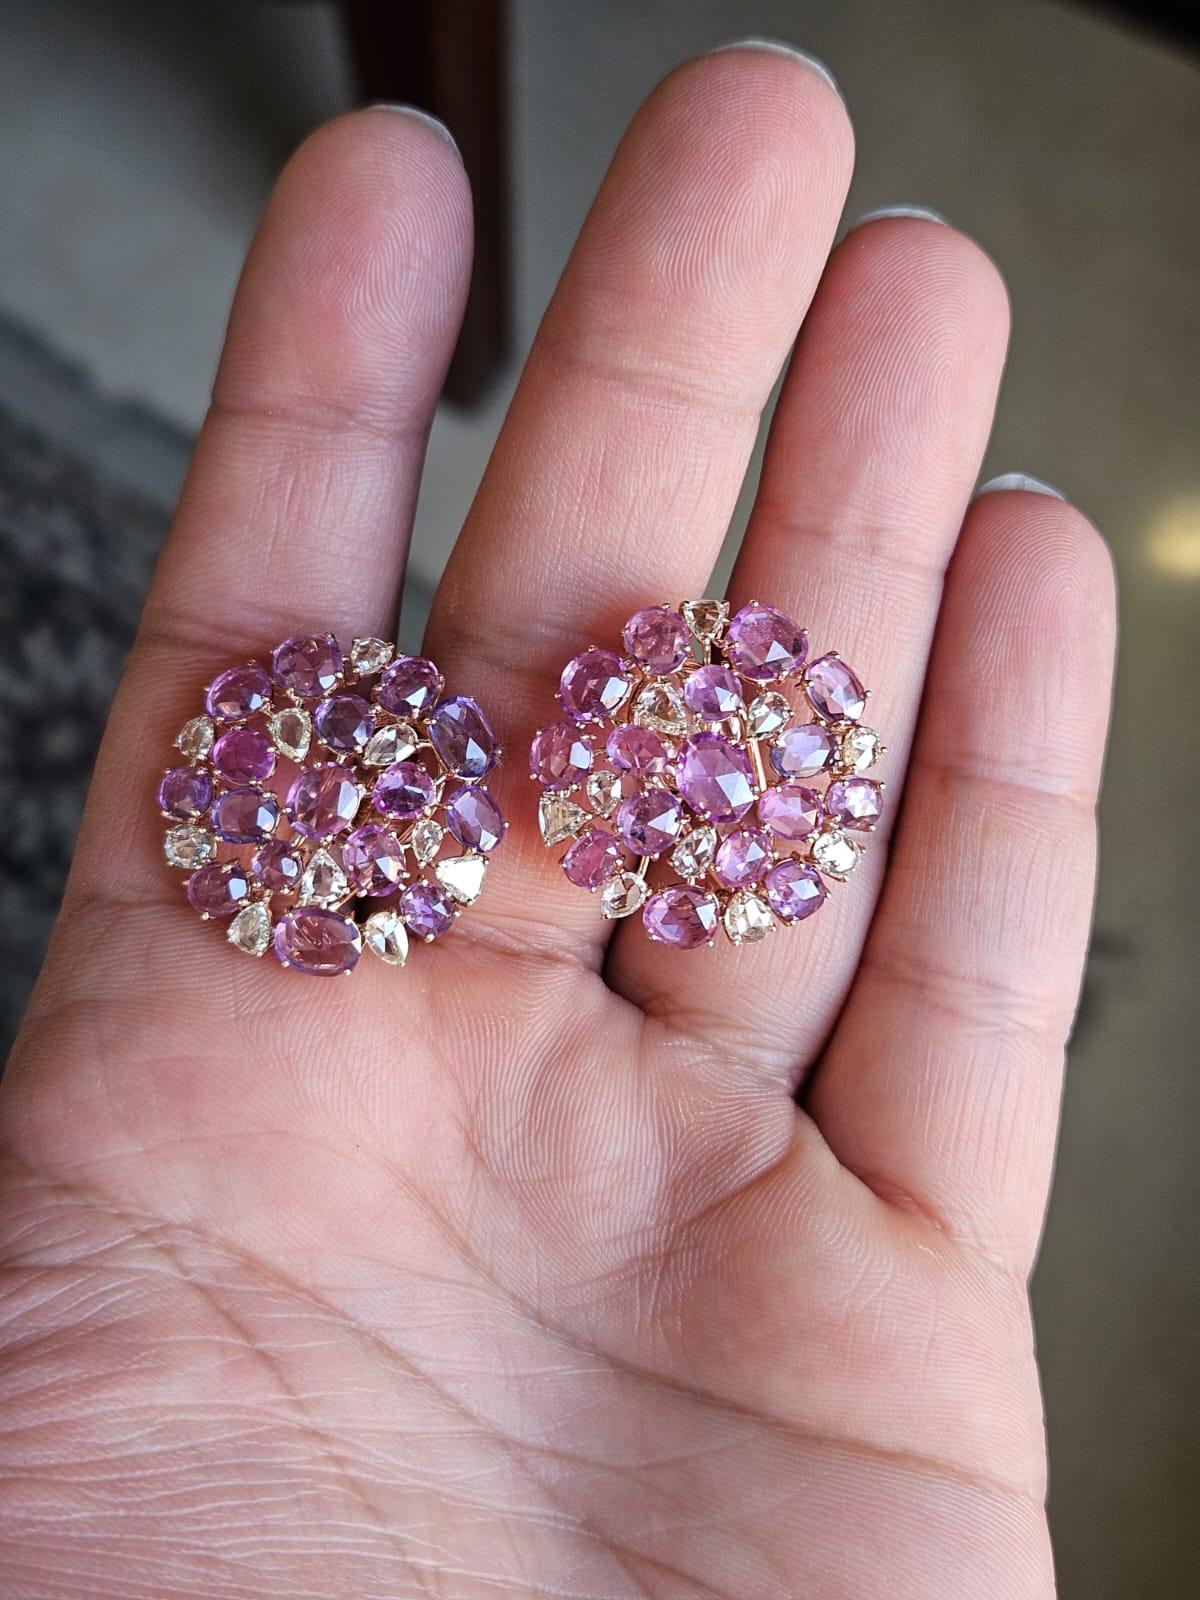 A very gorgeous and one of a kind, Multi Sapphires Stud Earrings set in 18K Rose Gold & Diamonds. The weight of the Multi Sapphires is 11.74 carats. The Multi Sapphire are of Ceylon (Sri Lanka) origin. The weight of the Rose Cut Diamonds is 1.90